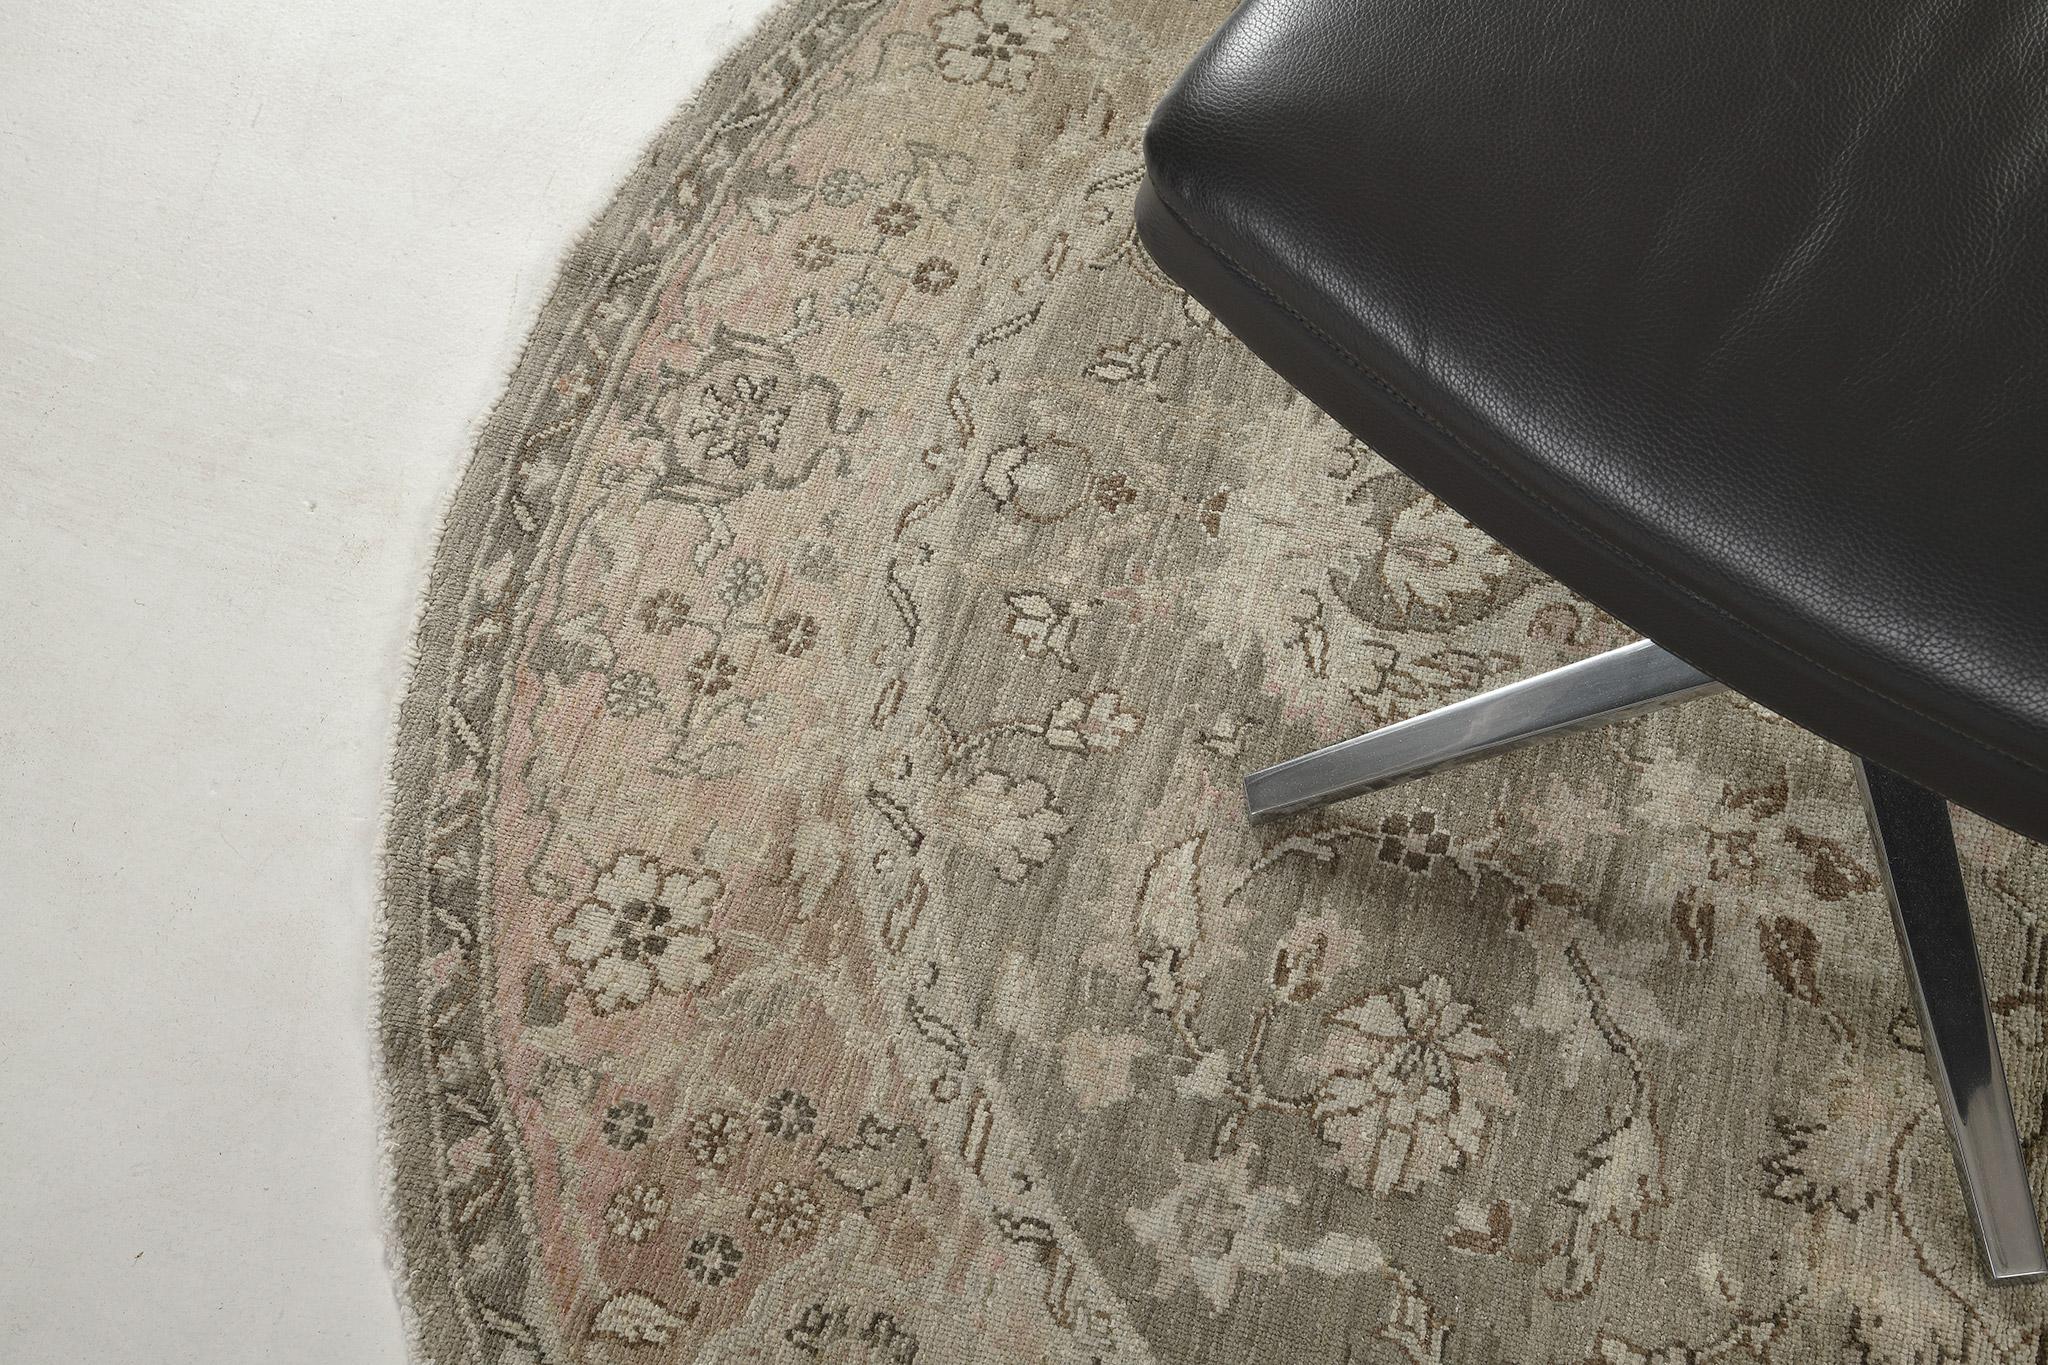 Get intrigued by this Agra Rug that features a floral design that complements the lush scheme. Series of symmetrically leafy scrolls, tendrils, and blooming elements are featured in a round-shaped rug. Perfect for your home interior that matches